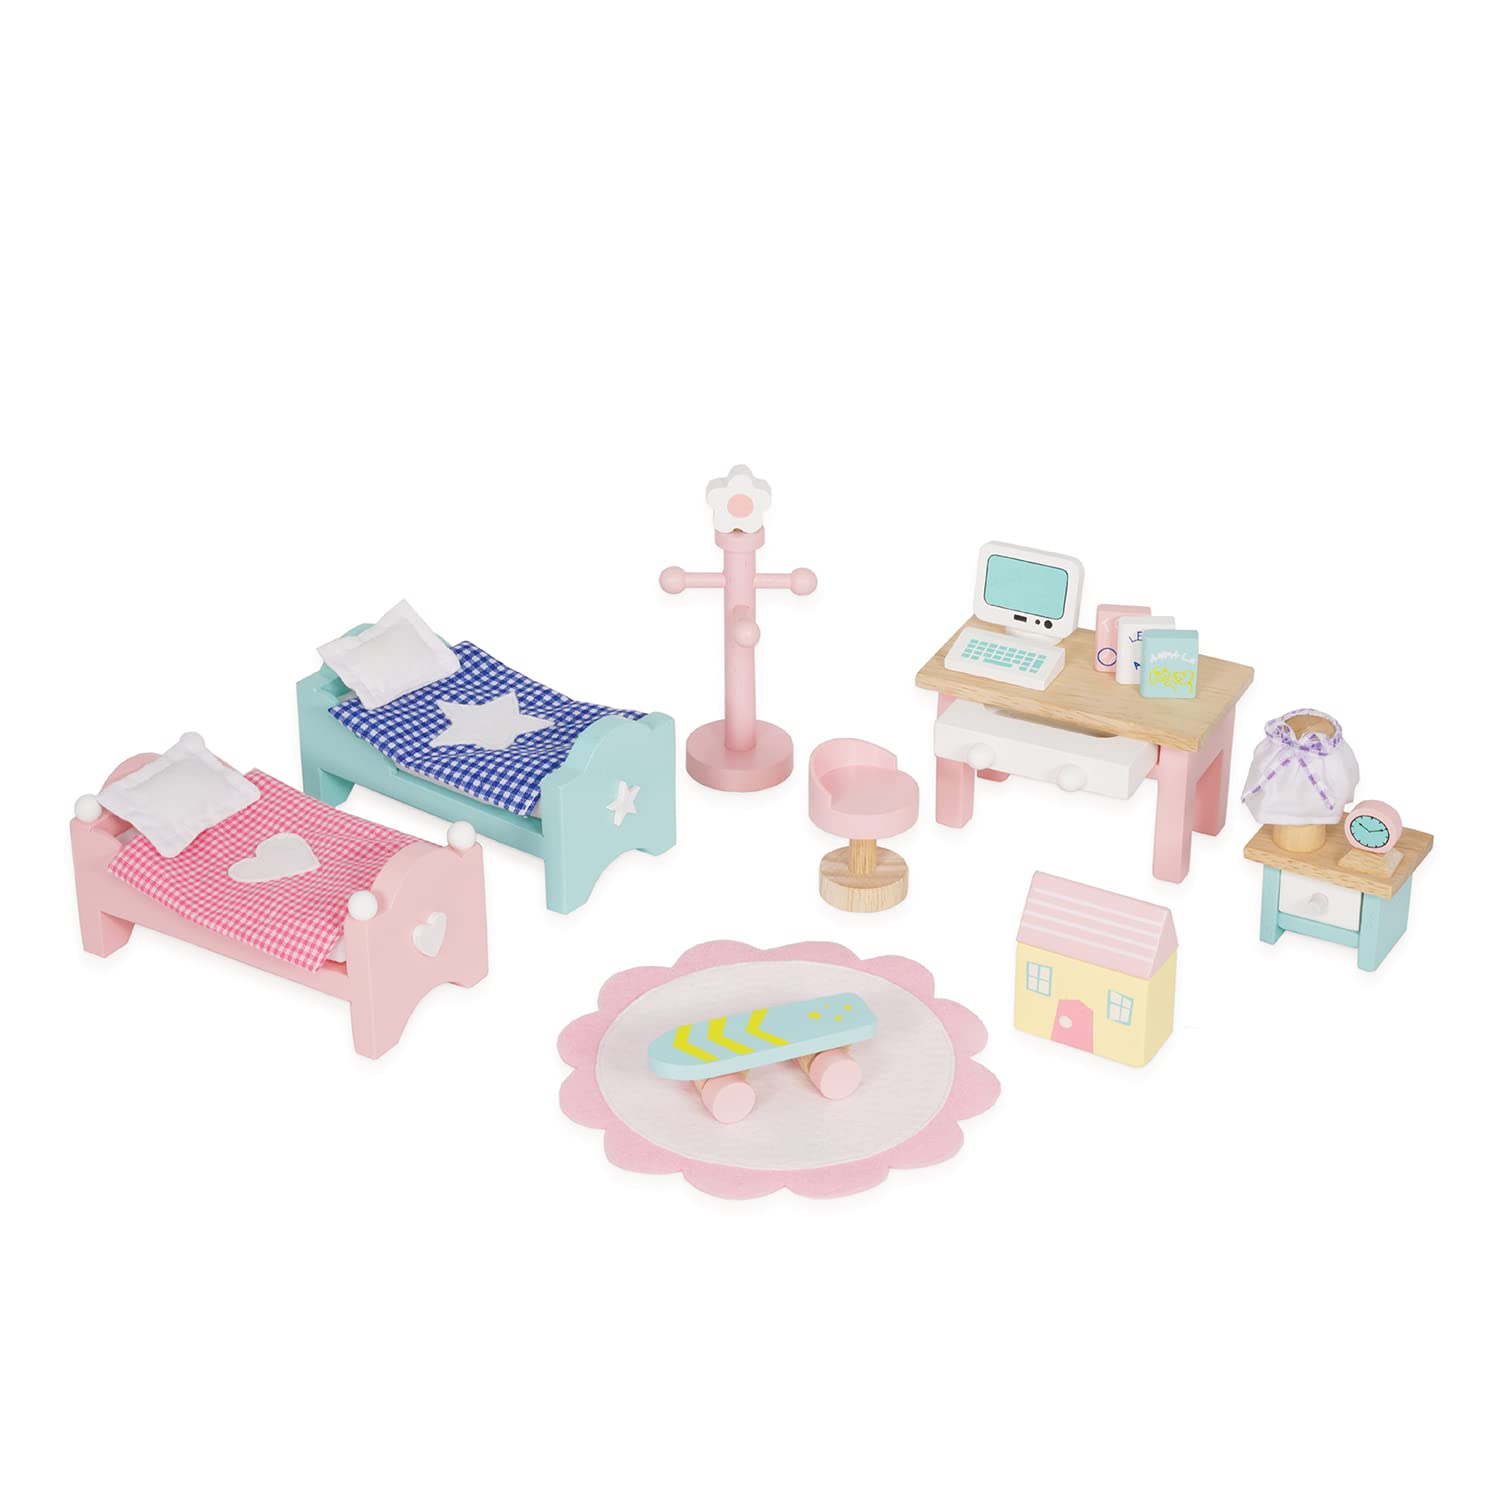 Le Toy Van - SugarPlum Wooden Bedroom Set | Dolls House Accessories Play Set For Dolls Houses | Girls and Boys Doll House Furniture Sets - Suitable For Ages 3+, Daisylane Child Bedroom (ME061)